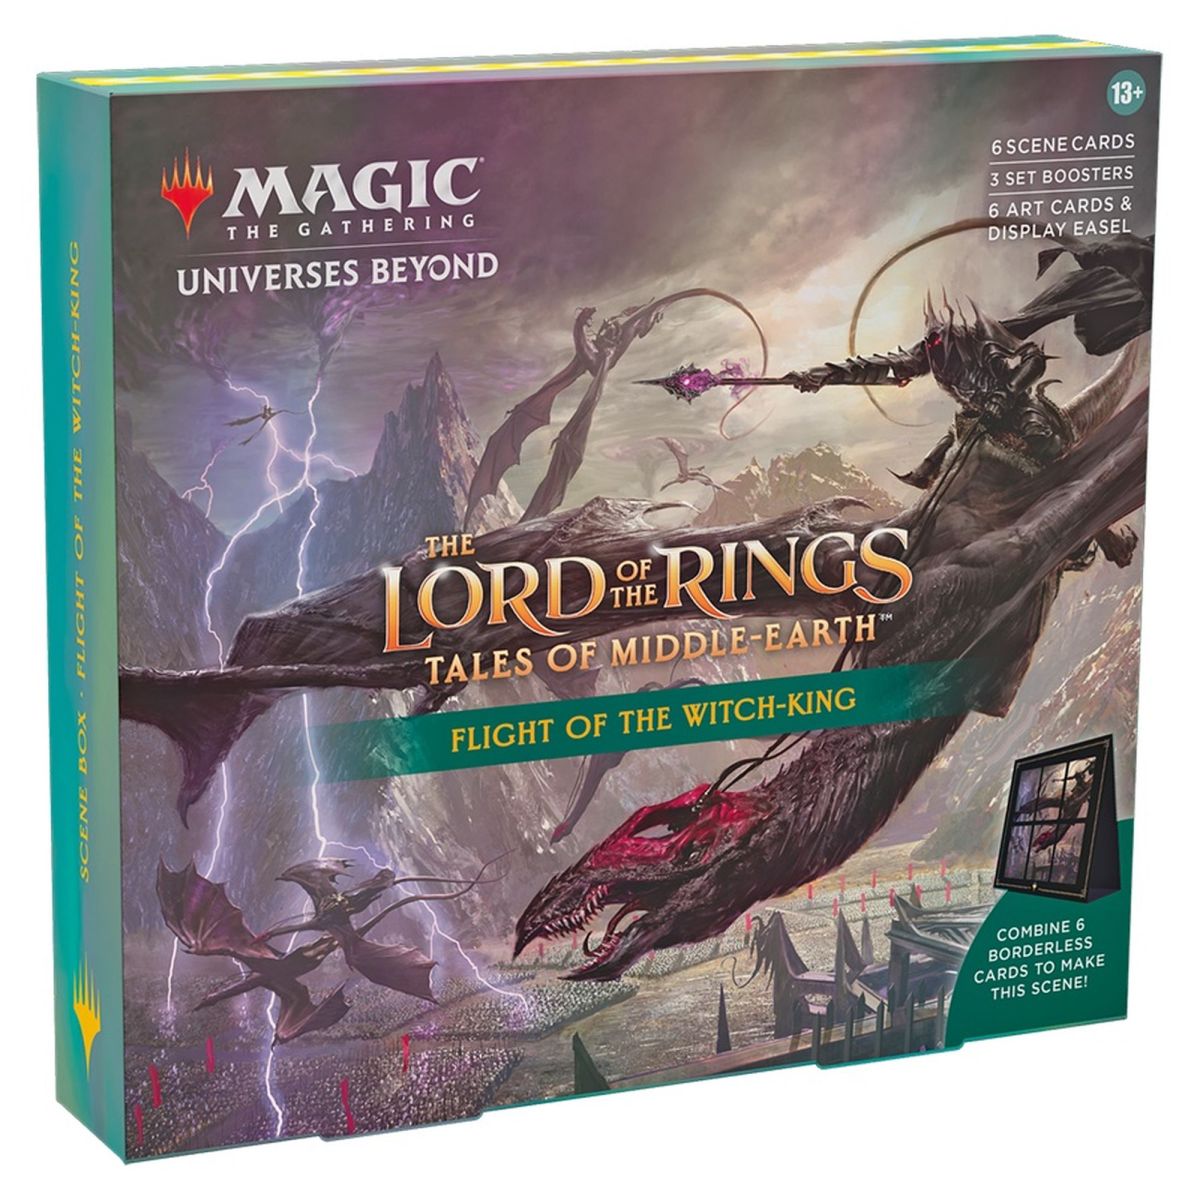 Magic The Gathering - Scene Box - The Lord of the Rings: Tales of Middle-earth - Flight of The Witch King - EN